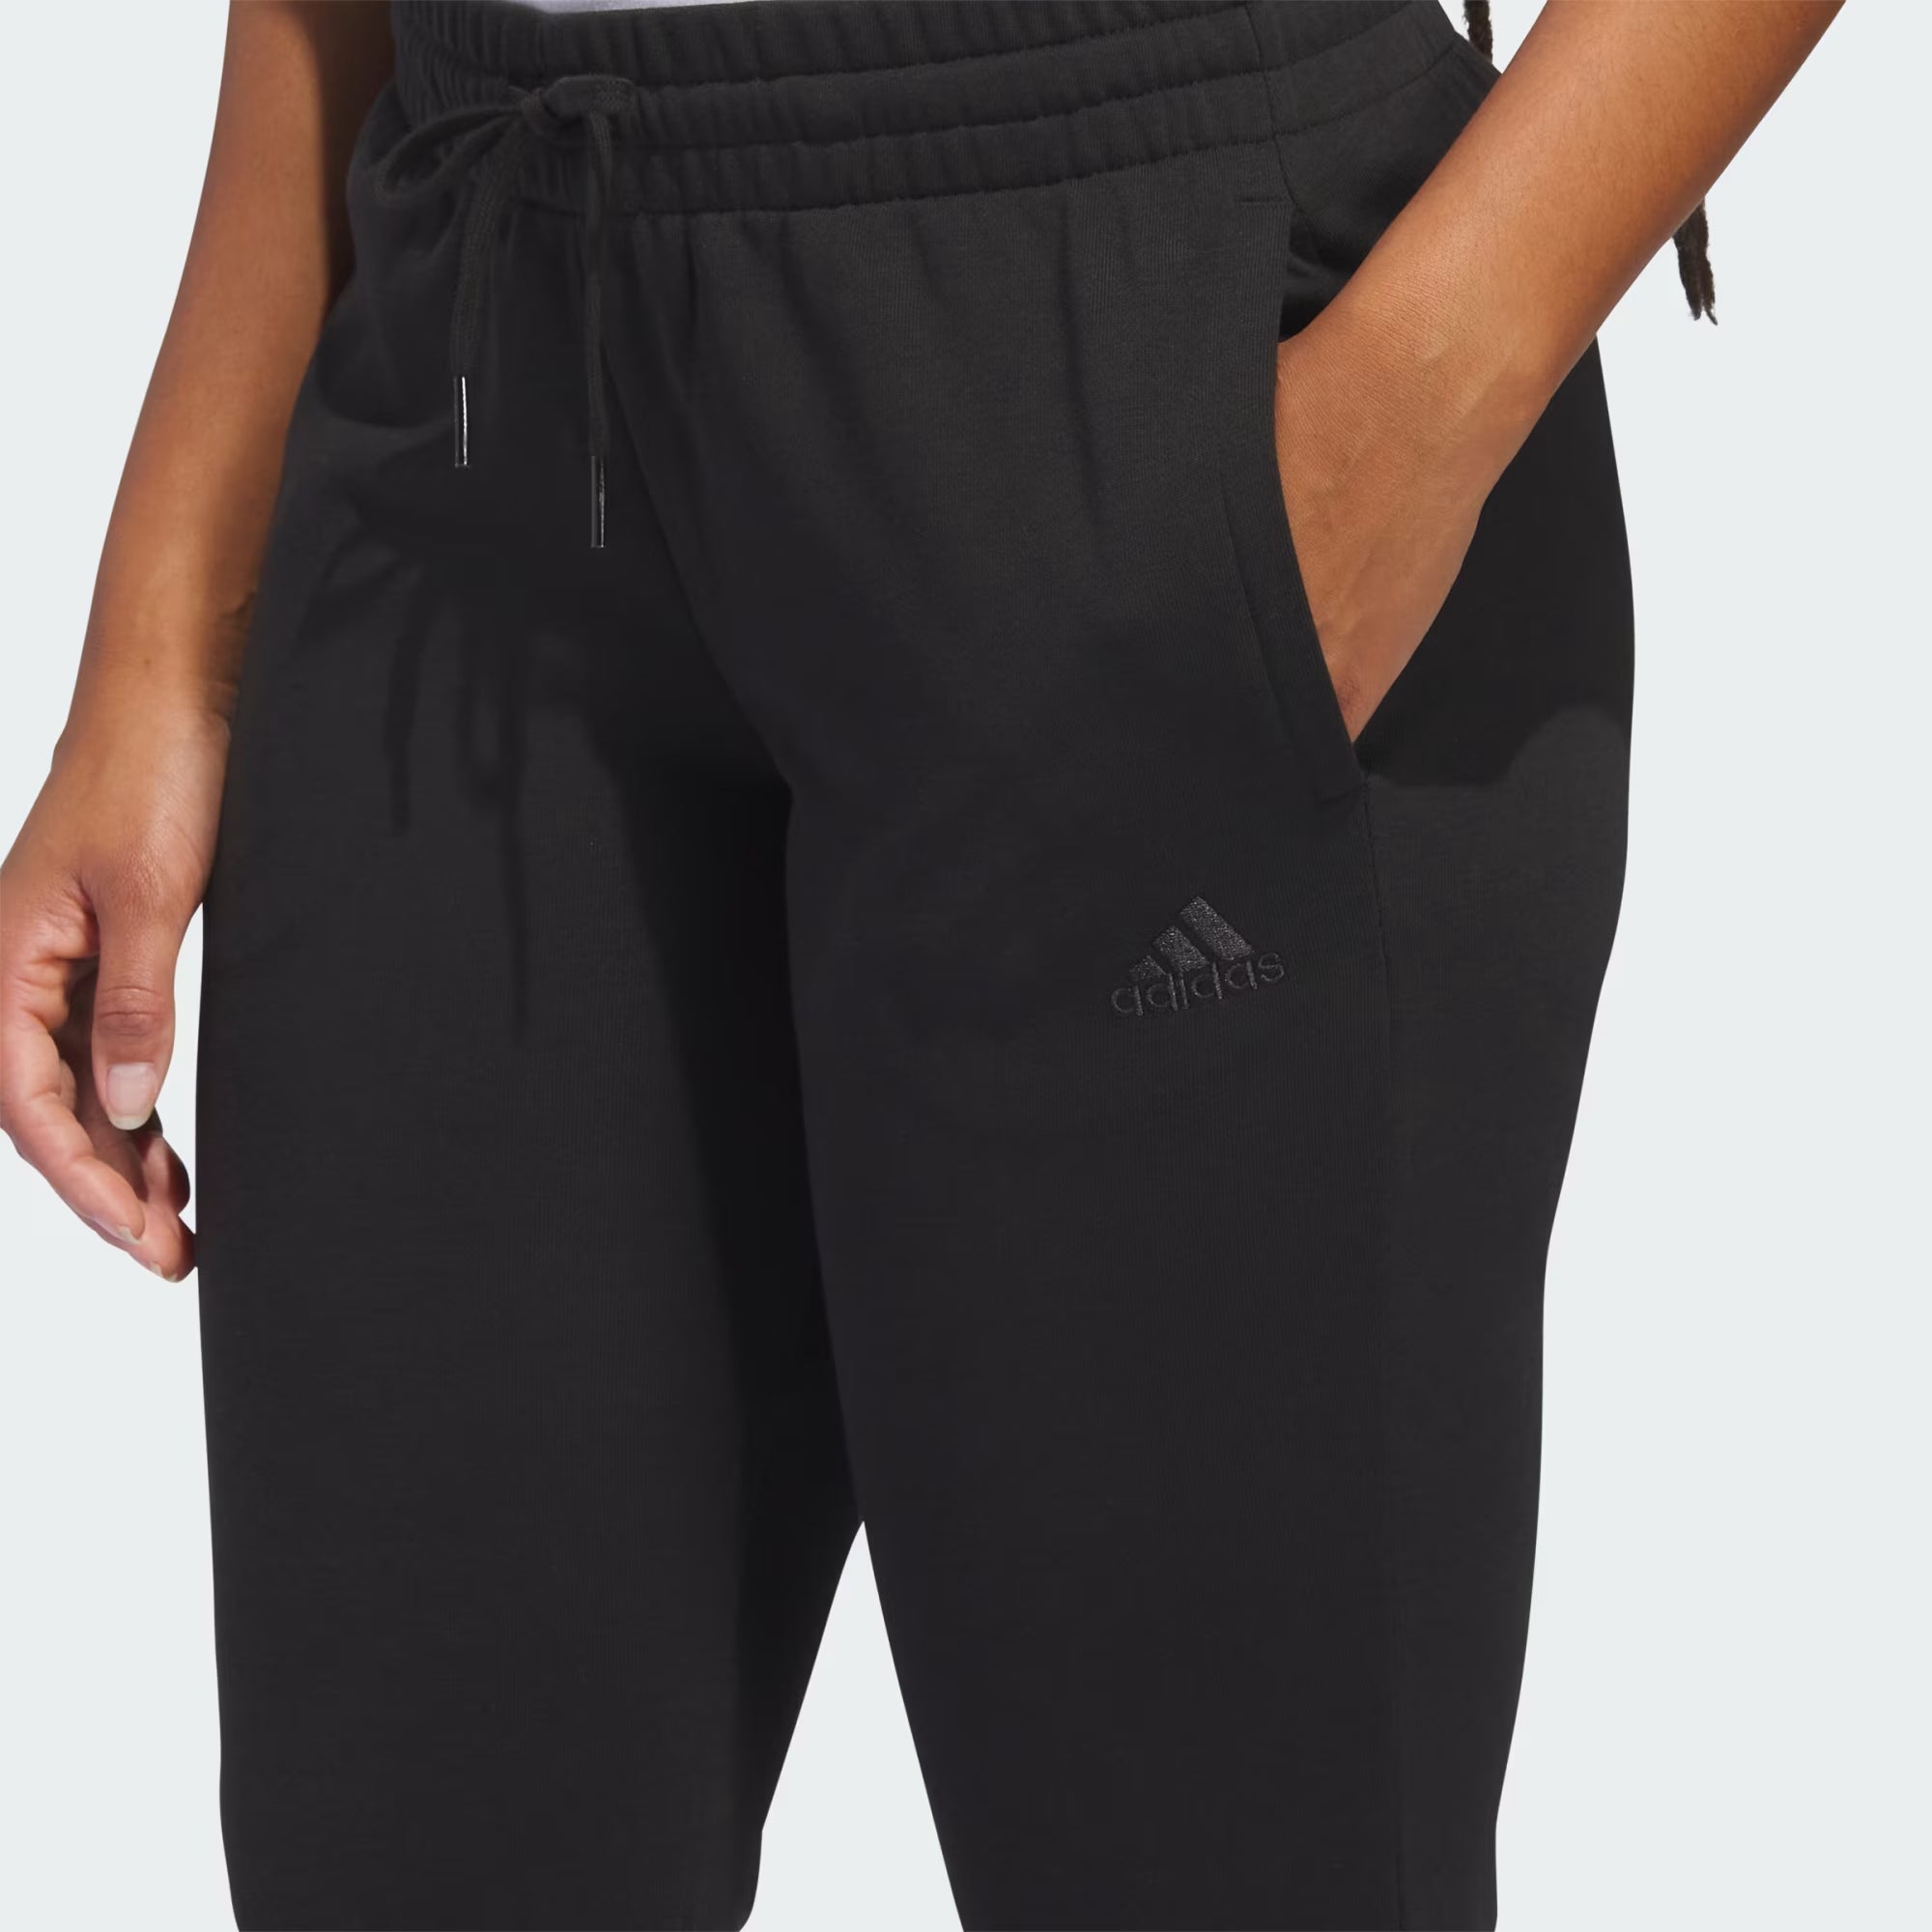 Adidas Essentials French Terry Logo Pants - Women